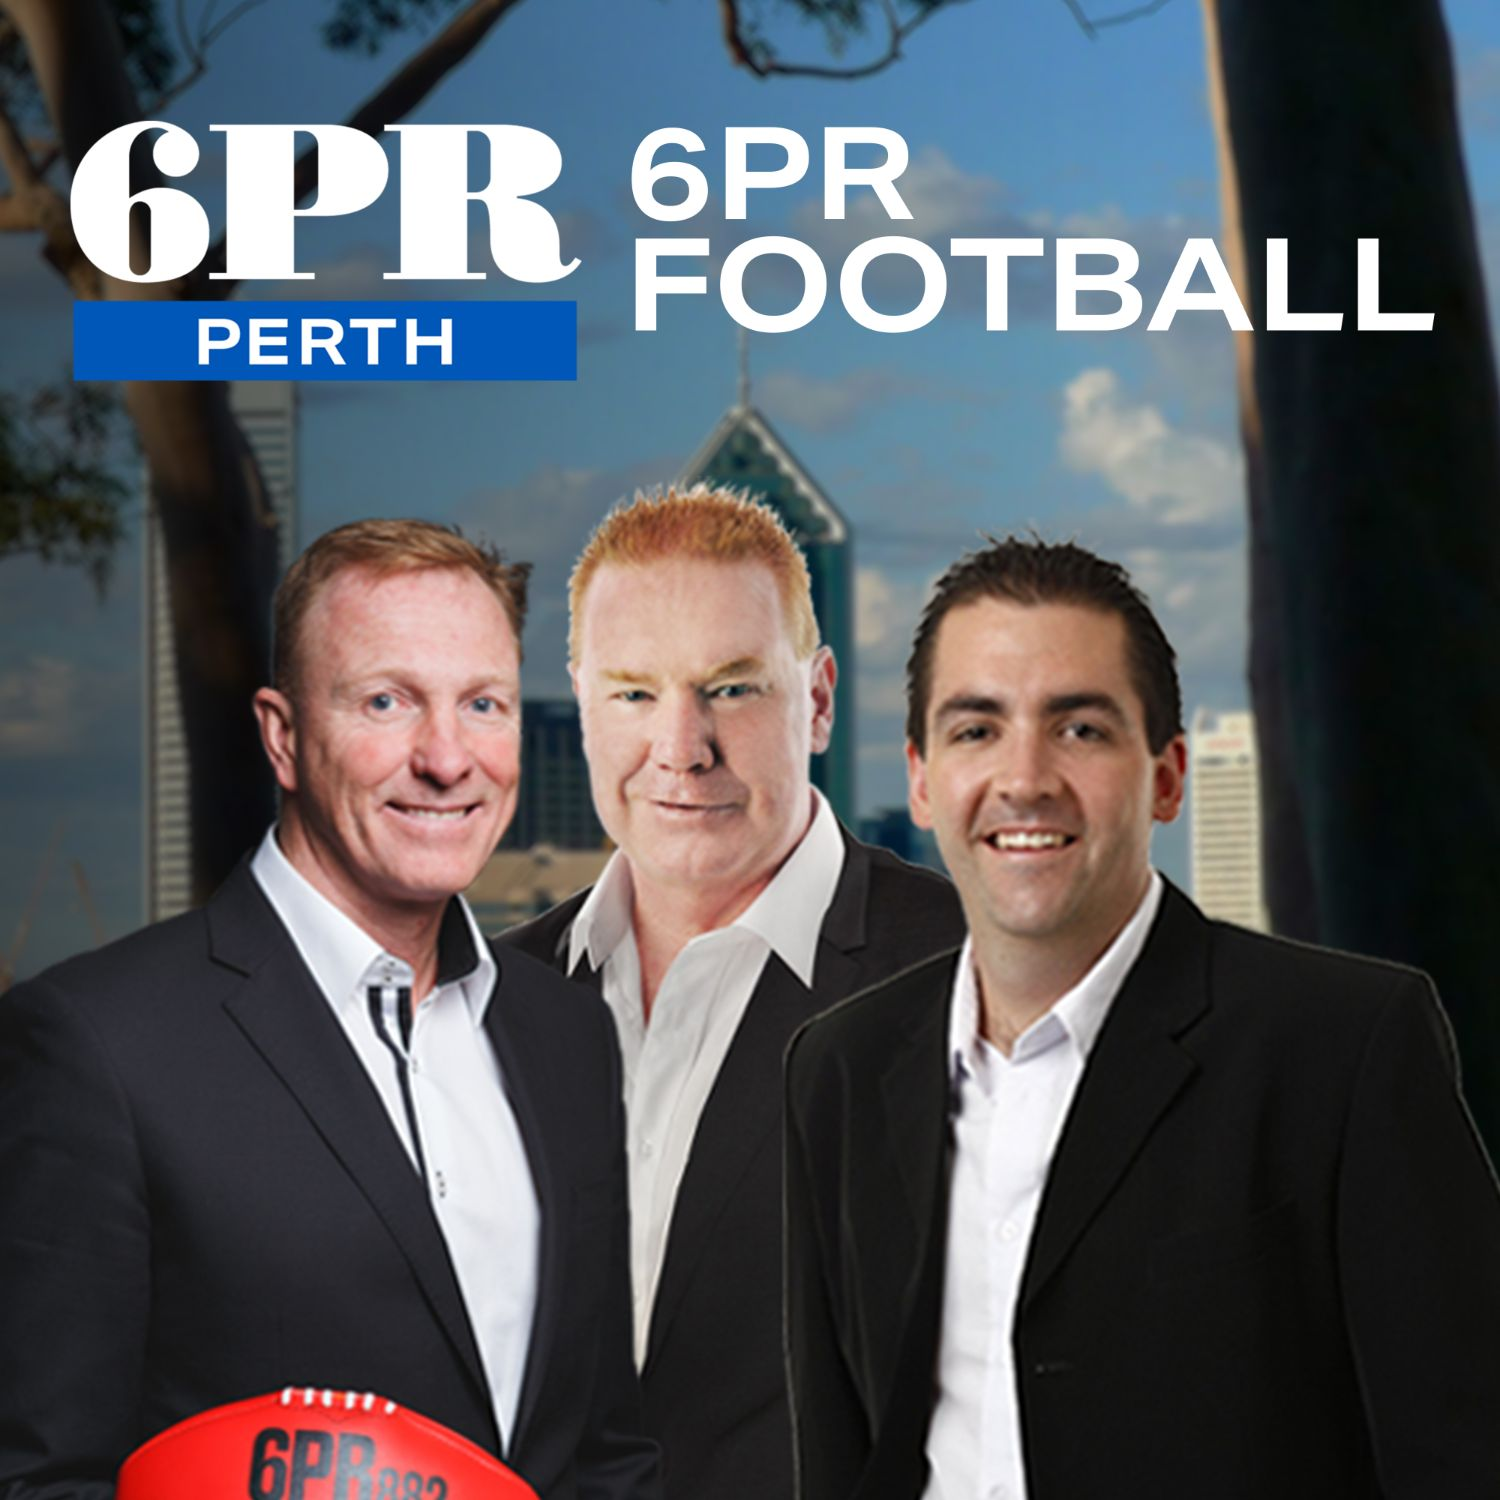 Luke Shuey chats to 6PR after loss to the Lions